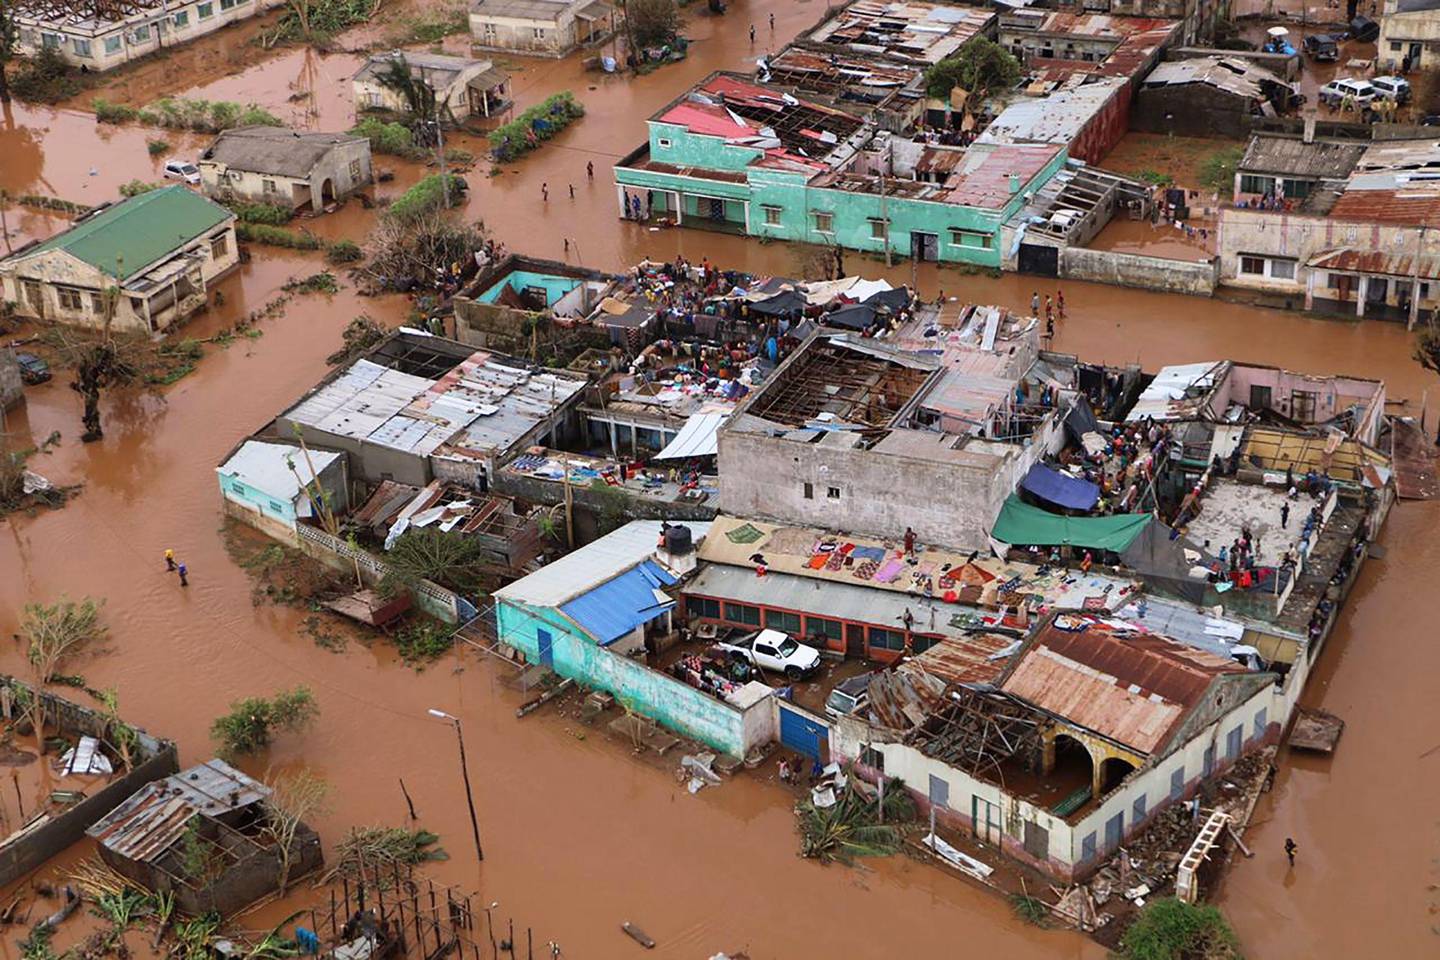 TOPSHOT - Residents stand on rooftops in a flooded area of Buzi, central Mozambique, on March 20, 2019, after the passage of cyclone Idai. - International aid agencies raced on March 20 to rescue survivors and meet spiralling humanitarian needs in three impoverished countries battered by one of the worst storms to hit southern Africa in decades. Five days after tropical cyclone Idai cut a swathe through Mozambique, Zimbabwe and Malawi, the confirmed death toll stood at more than 300 and hundreds of thousands of lives were at risk, officials said. (Photo by ADRIEN BARBIER / AFP)